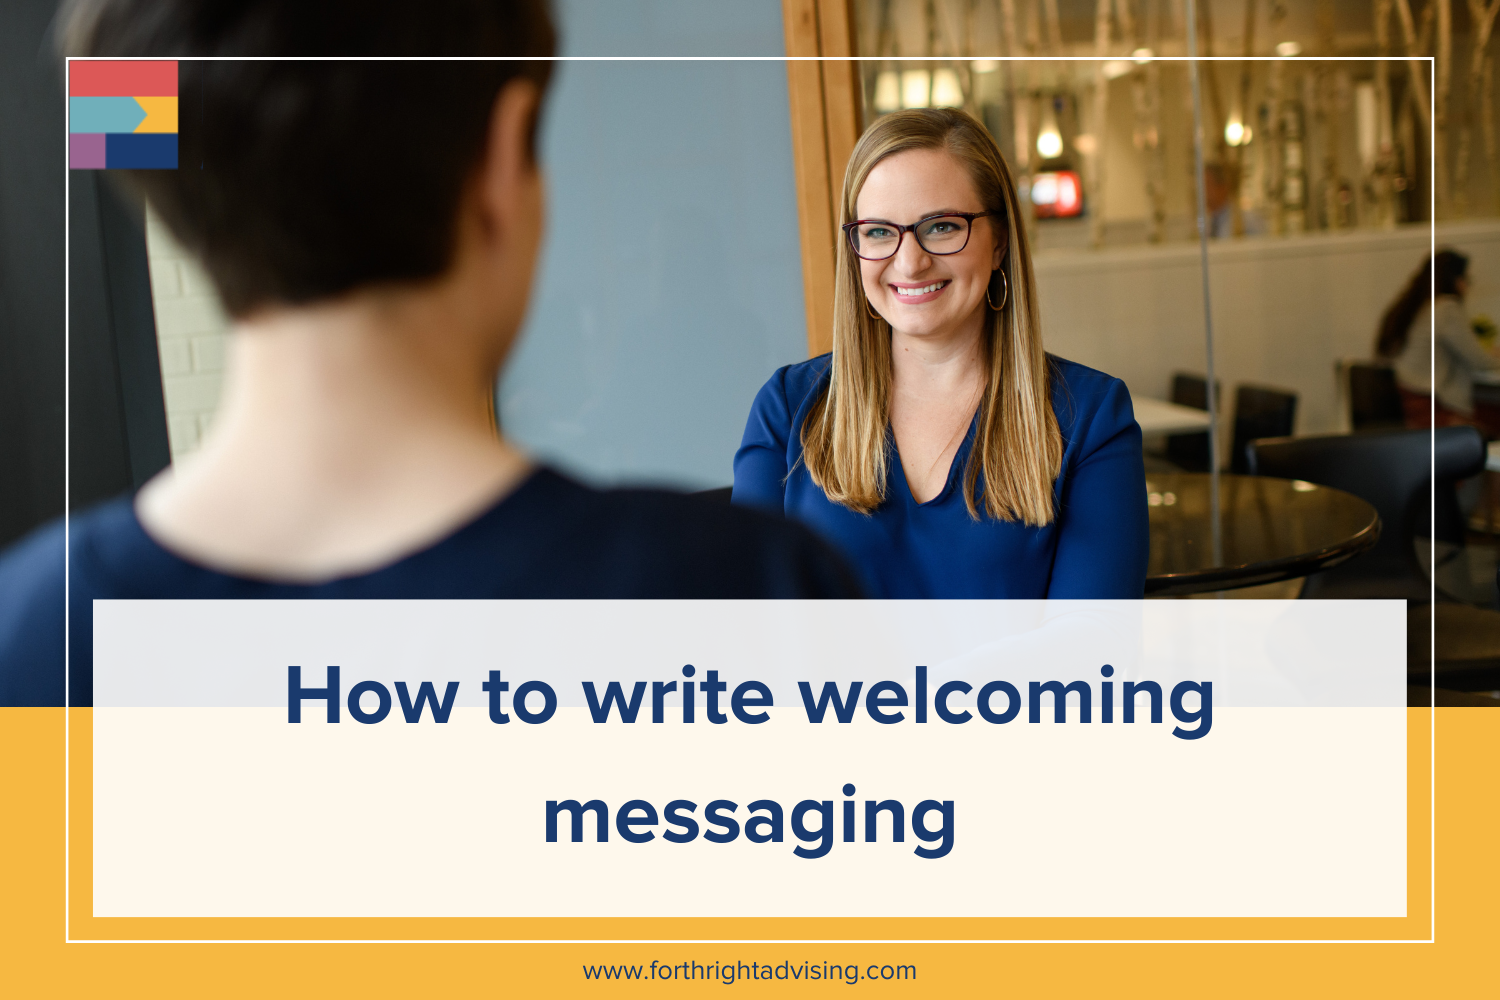 How to write welcoming messaging — Forthright Advising